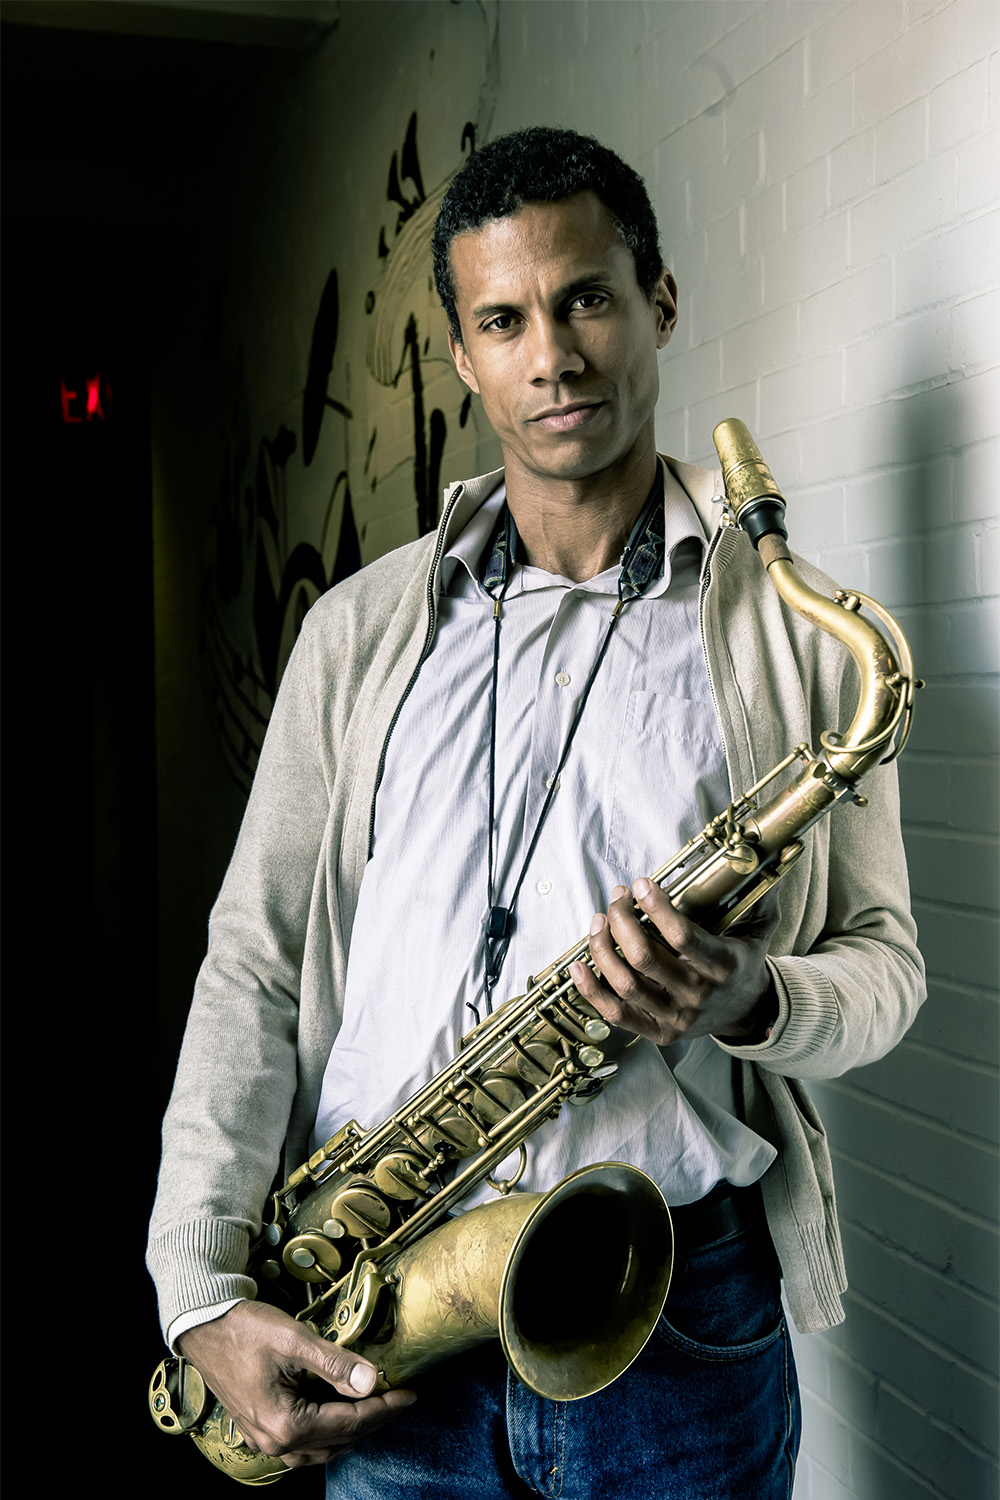 Mark Turner with his Saxophone